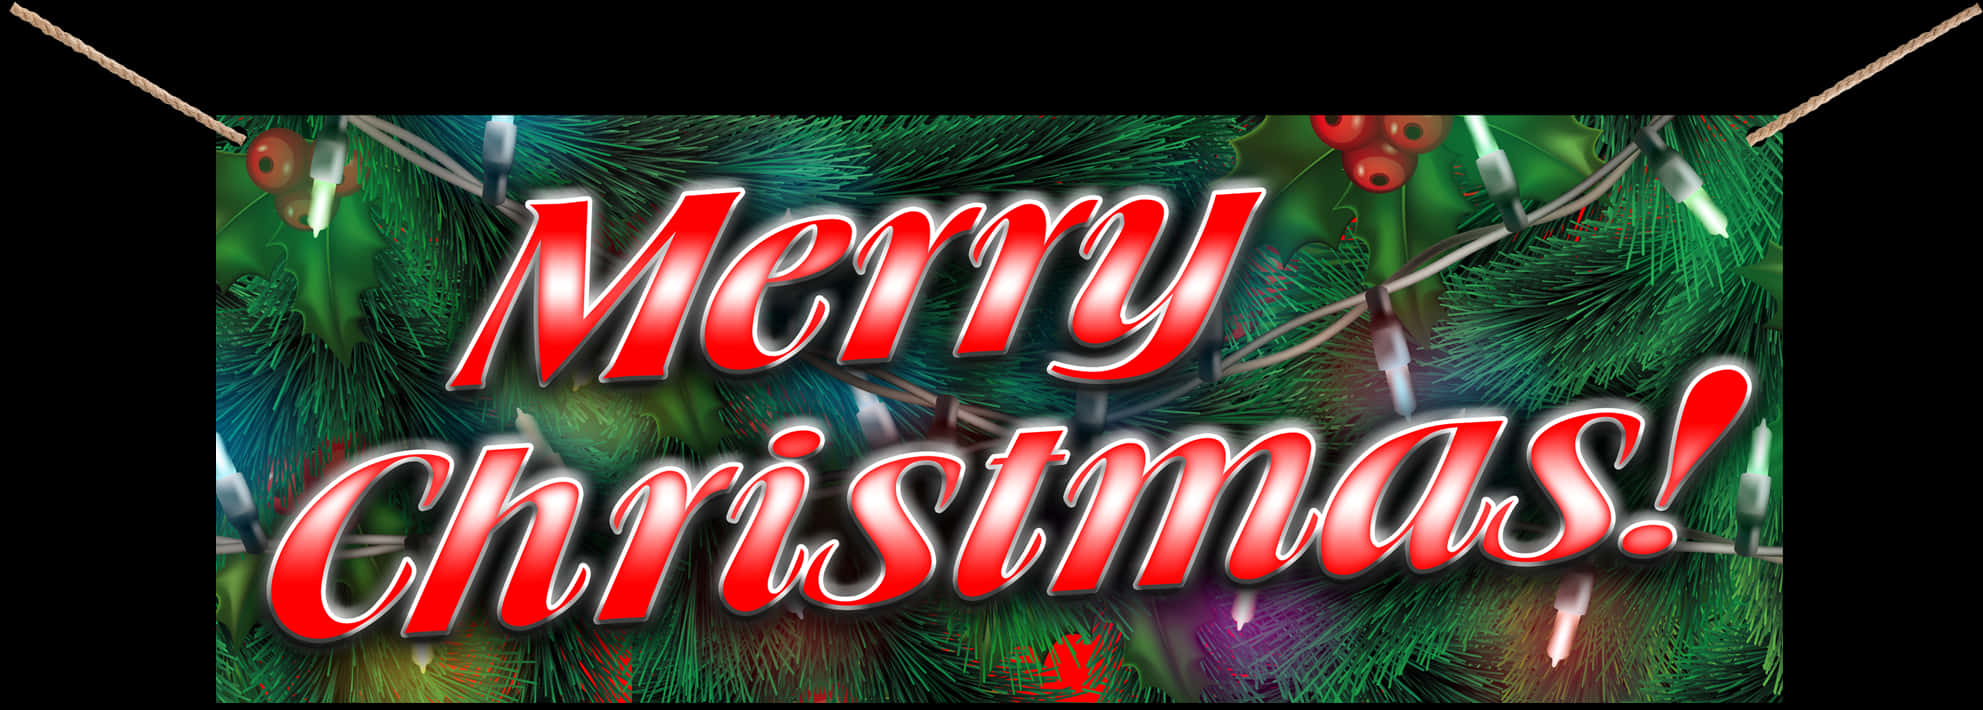 Merry Christmas Banner Image PNG